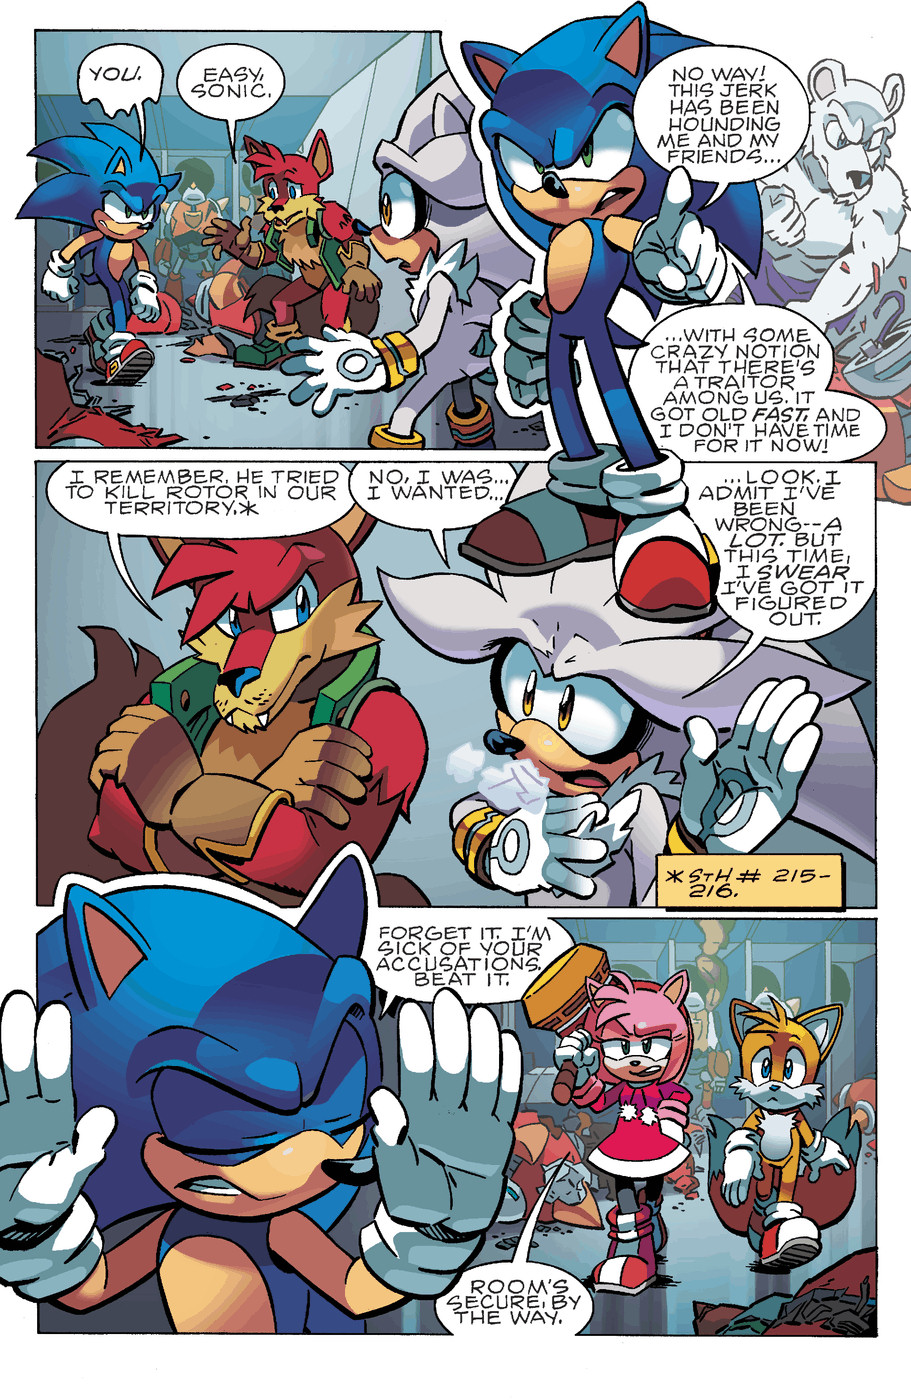 Sonic the Hedgehog Issue 247 Comics Sonic SCANF